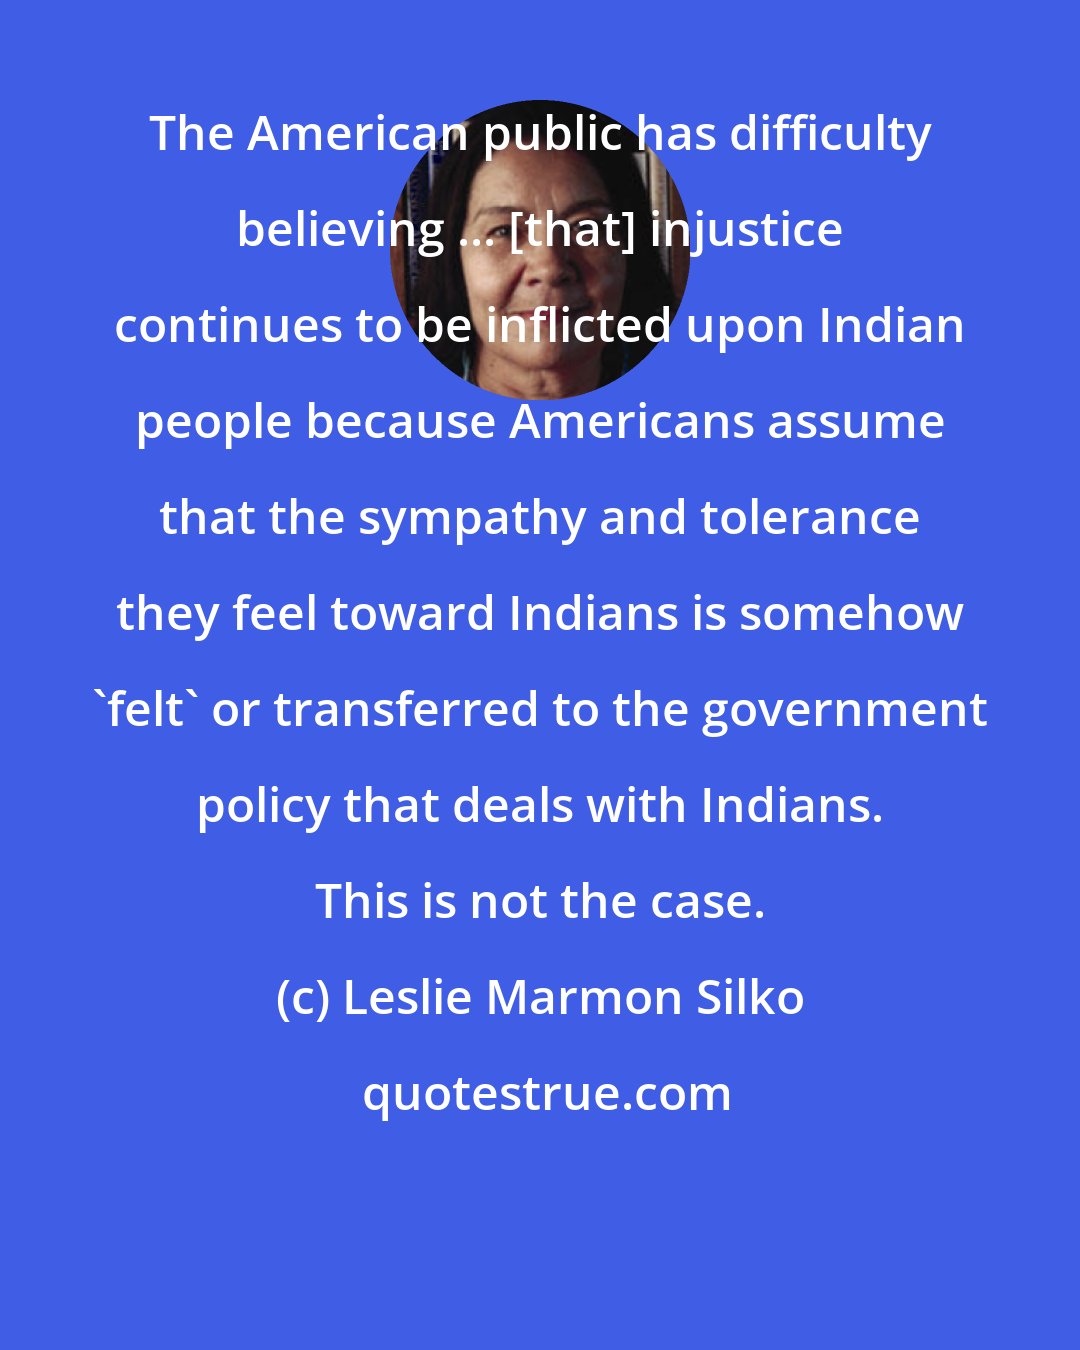 Leslie Marmon Silko: The American public has difficulty believing ... [that] injustice continues to be inflicted upon Indian people because Americans assume that the sympathy and tolerance they feel toward Indians is somehow 'felt' or transferred to the government policy that deals with Indians. This is not the case.